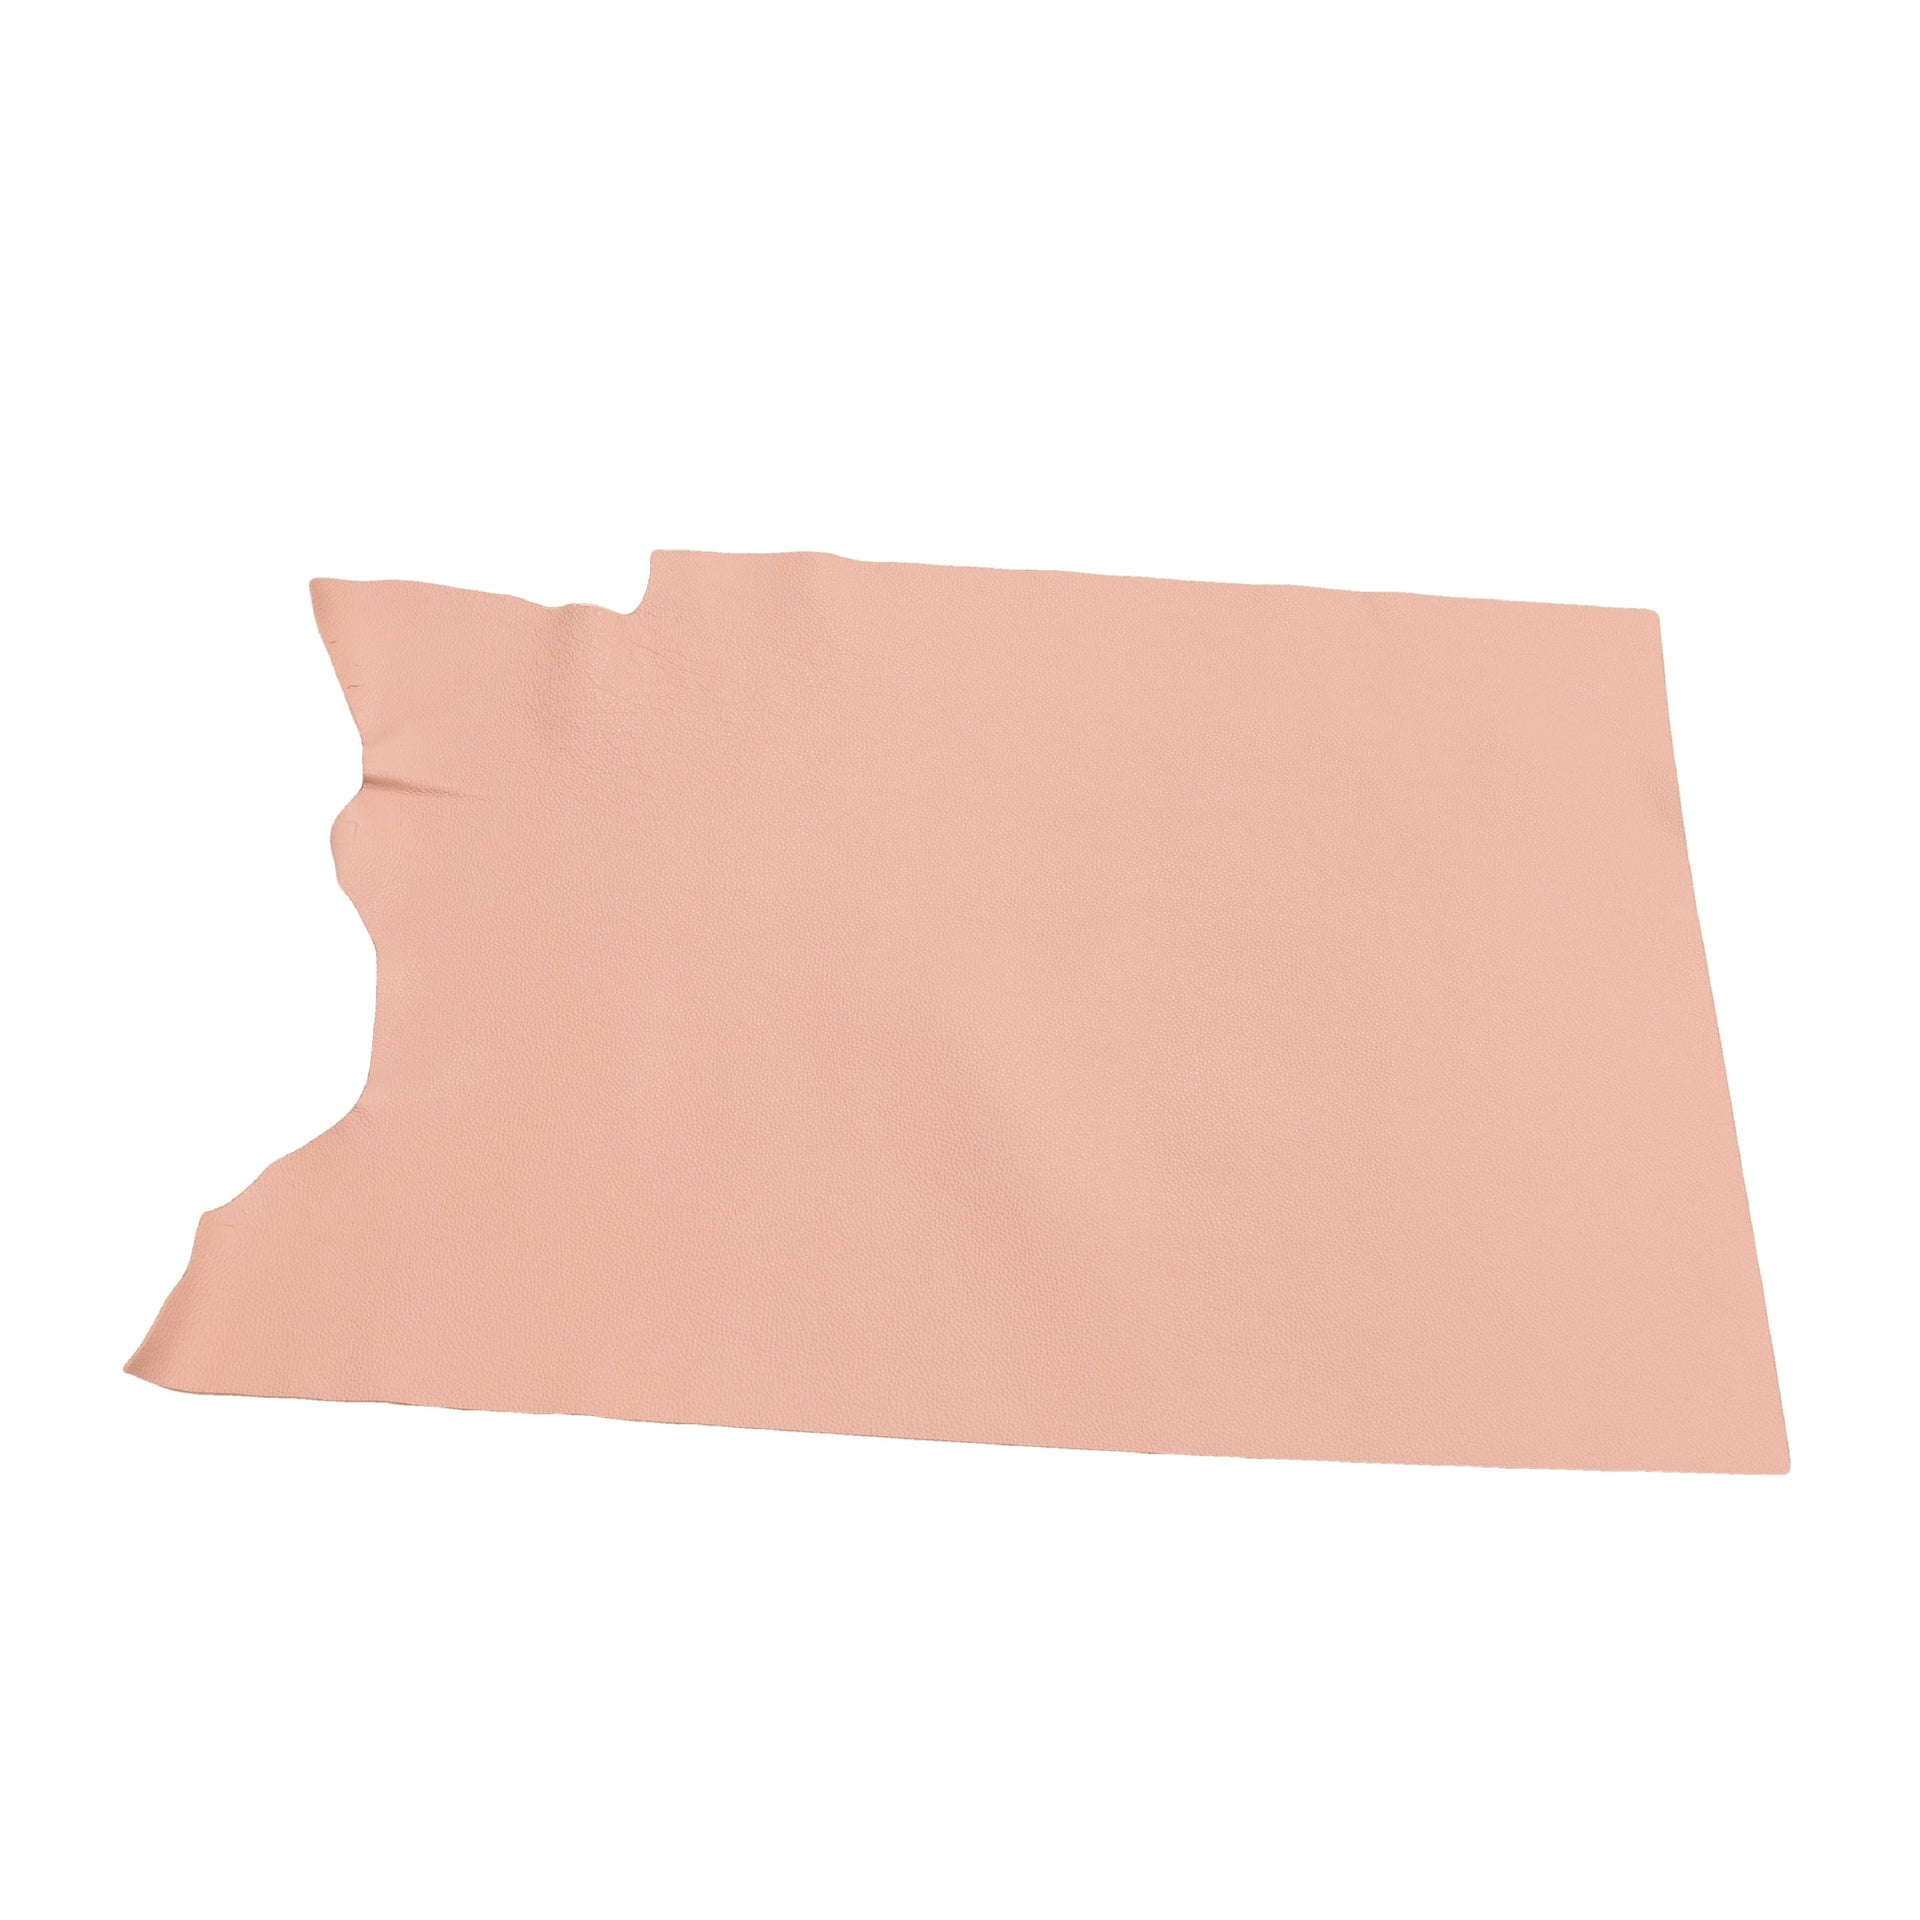 San Diego Sweet Pink Tried n True 3-4 oz Leather Cow Hides, Middle Piece / 6.5-7.5 Square Foot | The Leather Guy